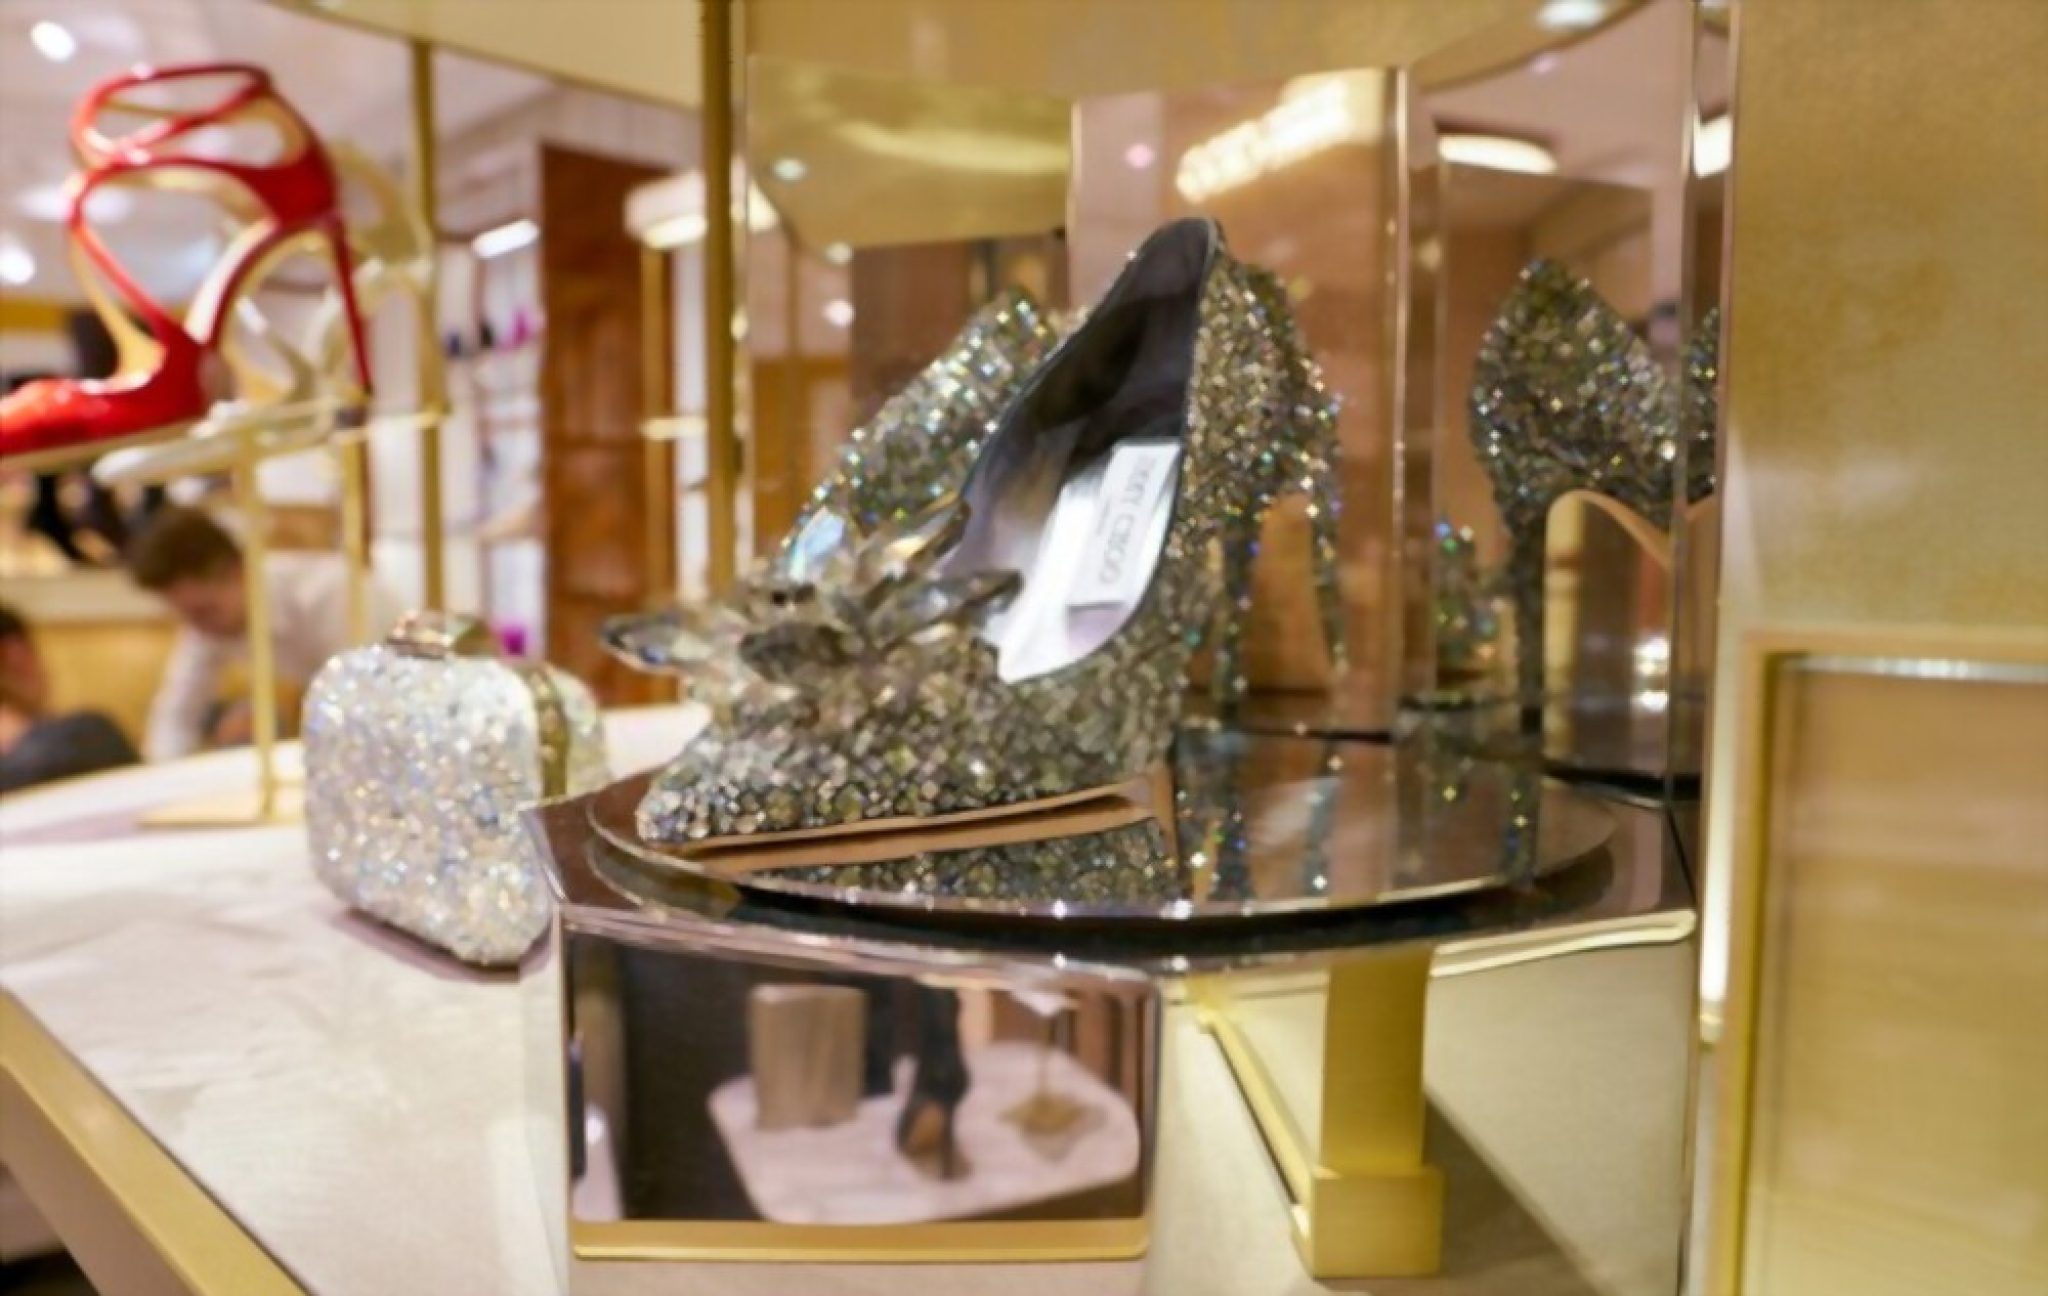 Jimmy Choo Shoe Size Chart What Makes Them Special? The Shoe Box NYC